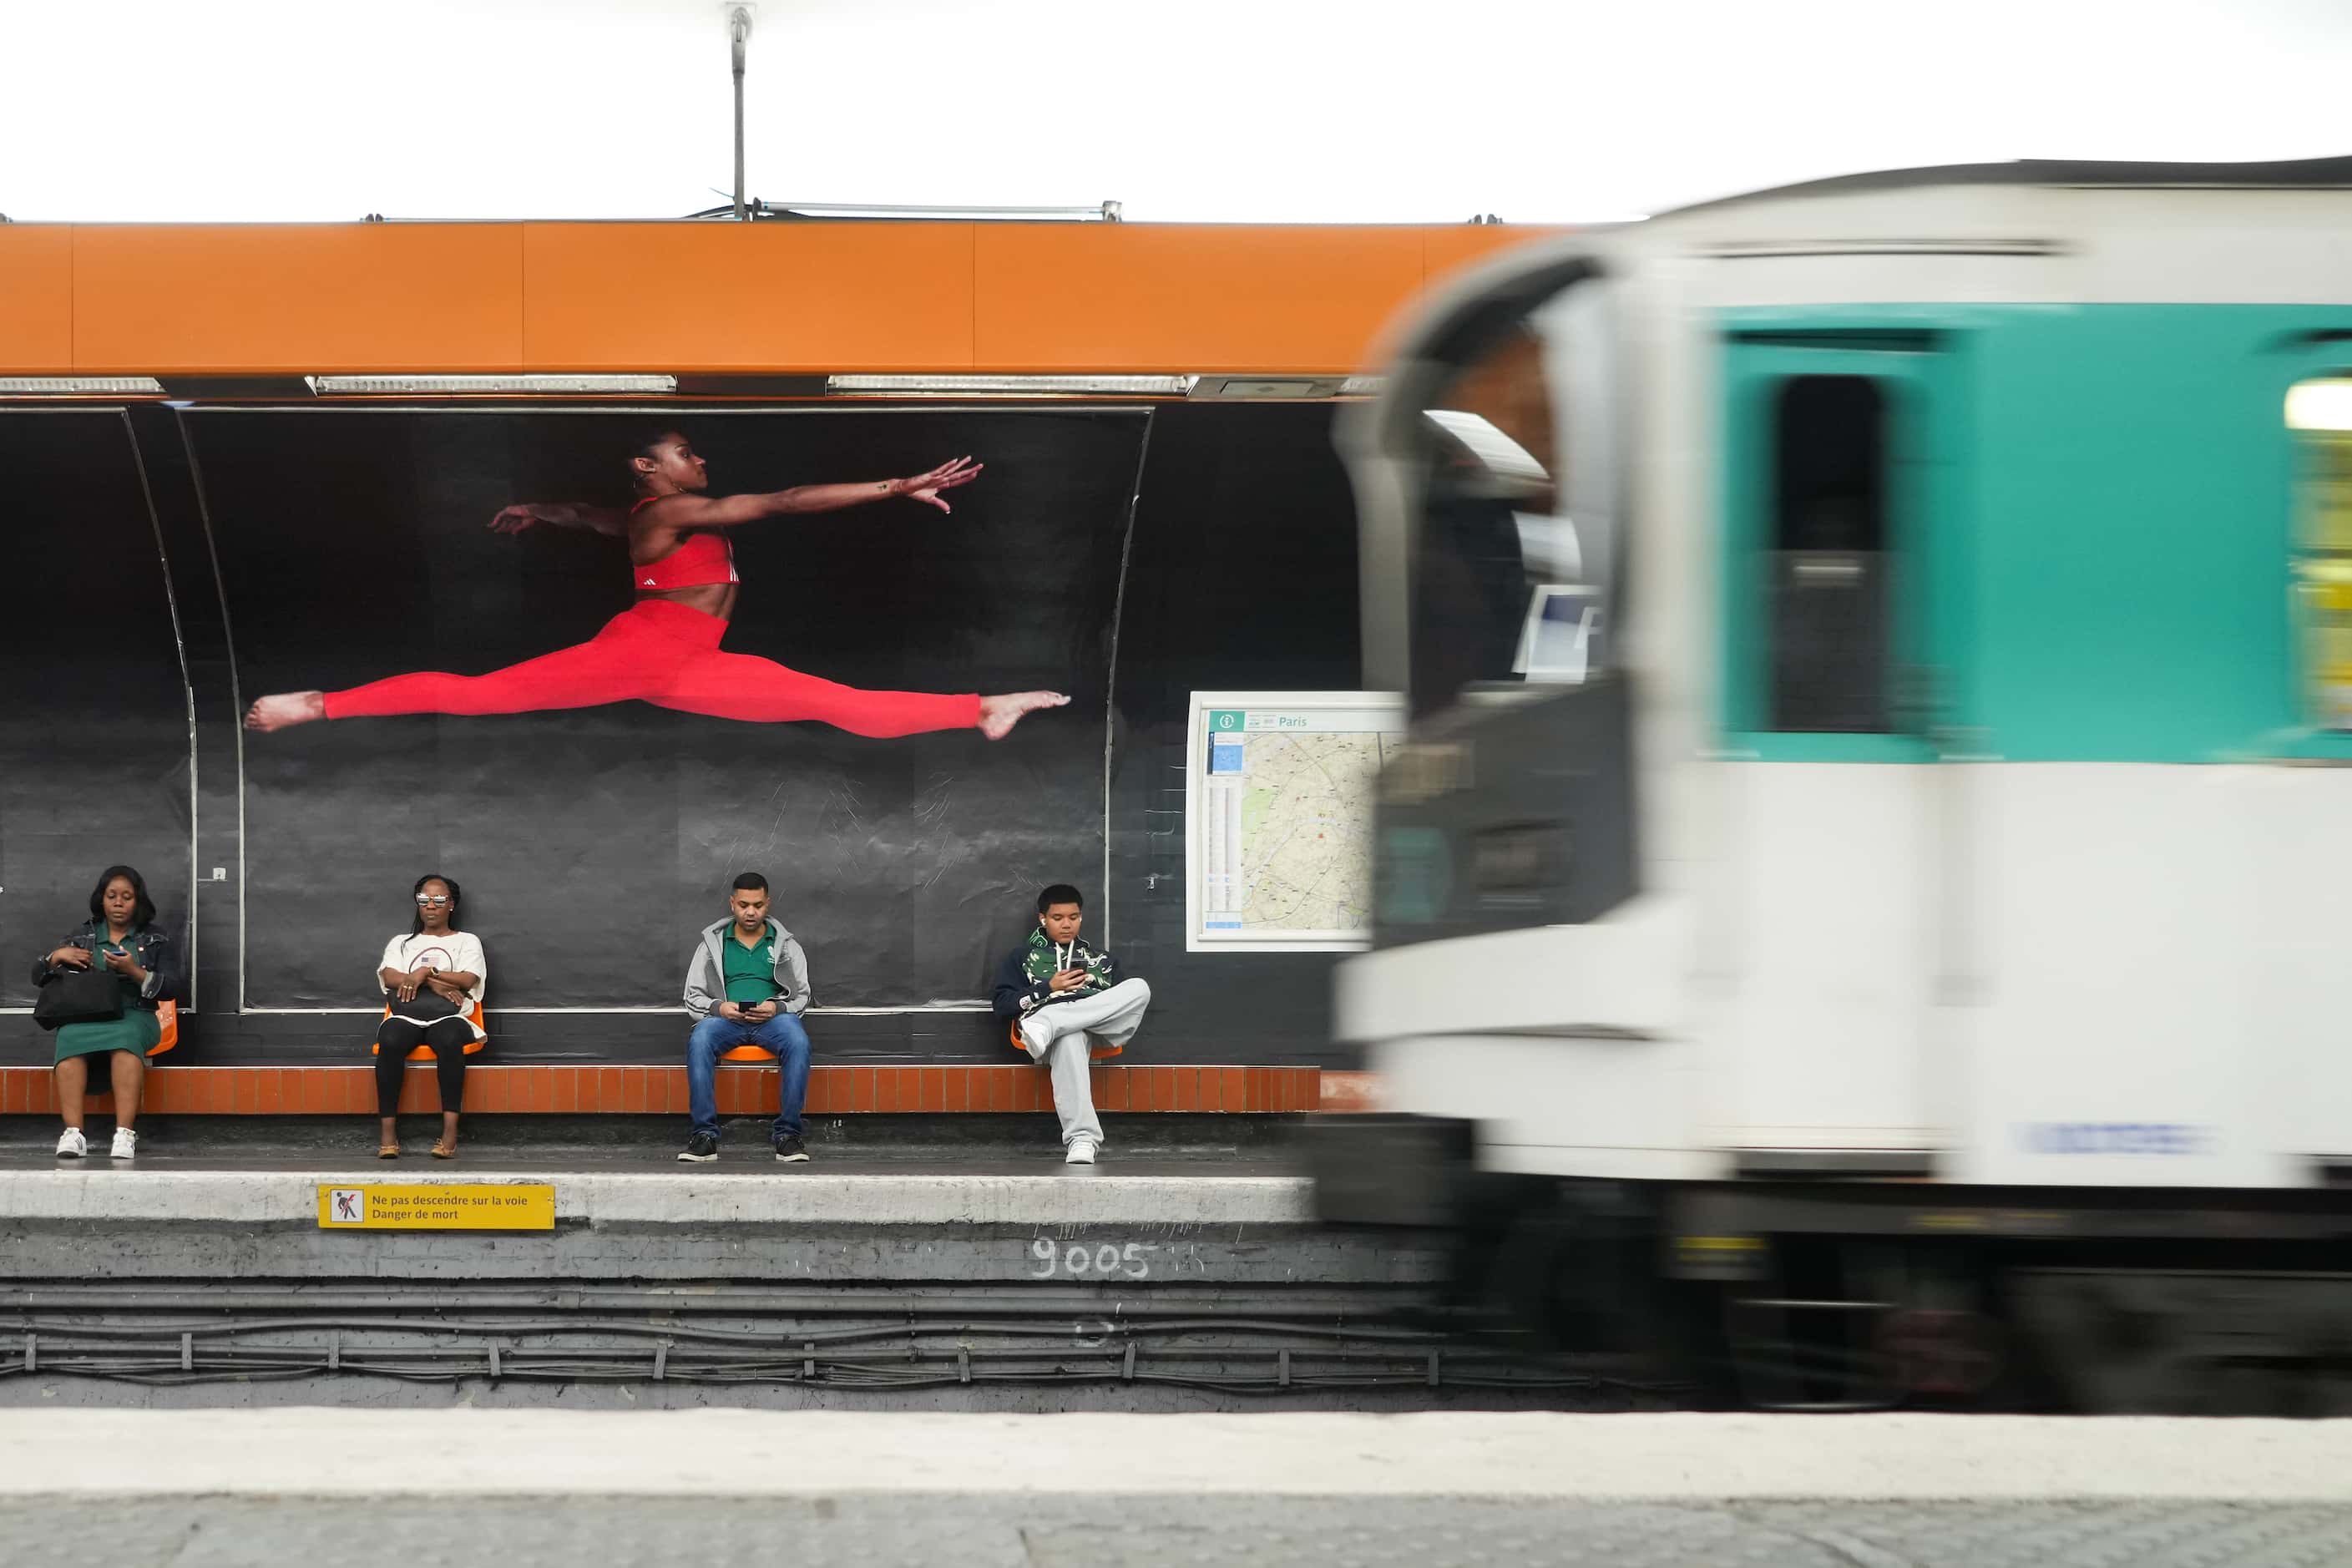 People wait for a train in a metro station under an image of French gymnast Mélanie de Jesus...